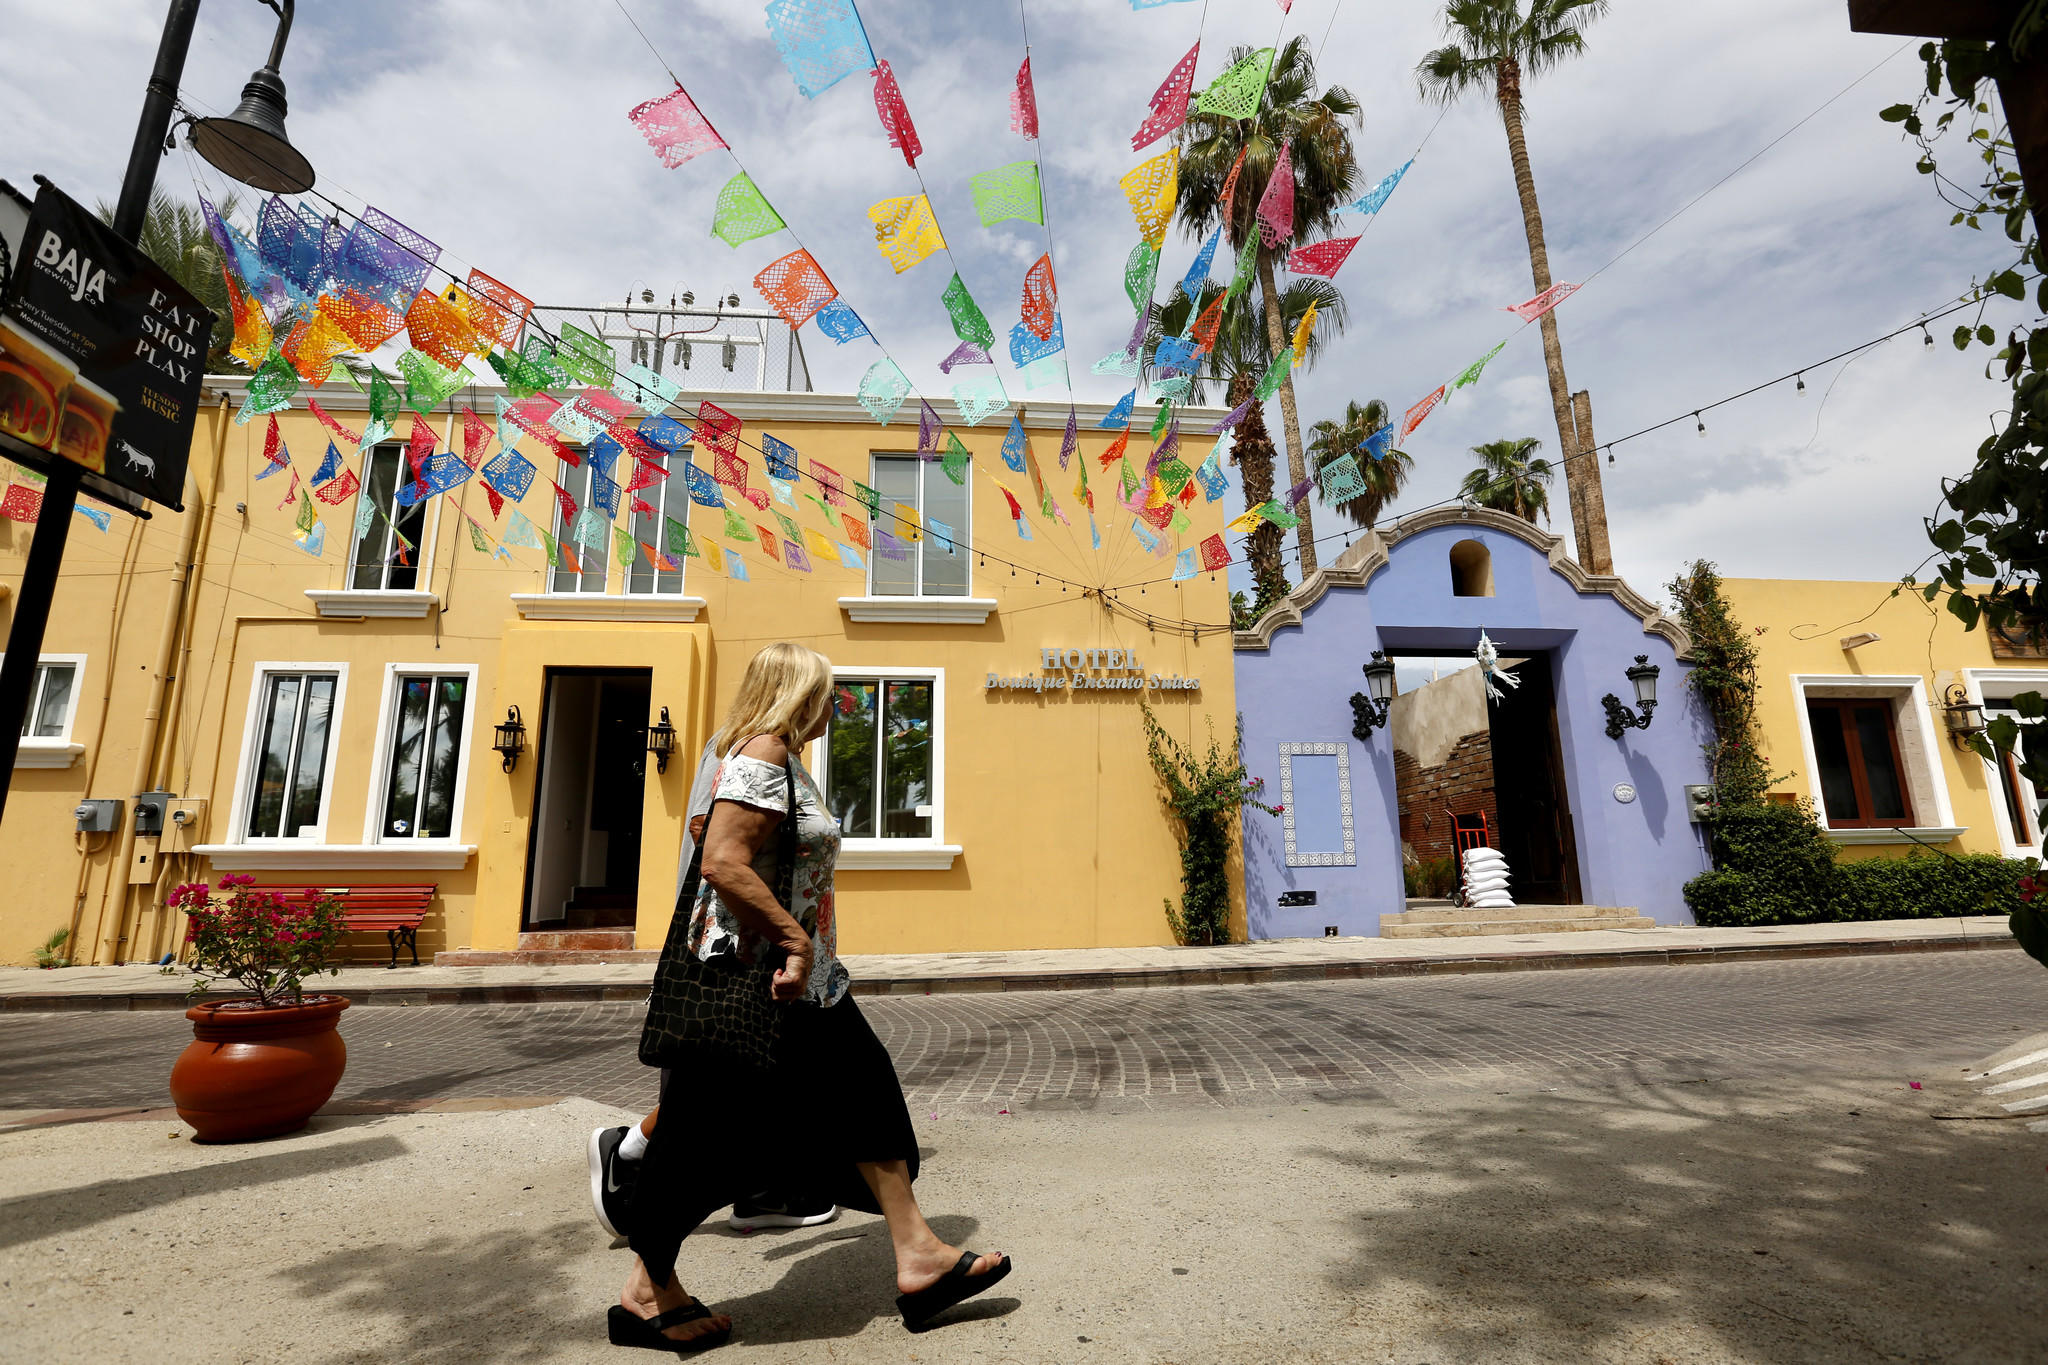 Colonial buildings line the streets of the historic central district in San Jose del Cabo. The U.S. Department of State issued a warning to U.S. citizens about the risk of traveling the Los Cabos area due to the activities of criminal organizations in those areas.